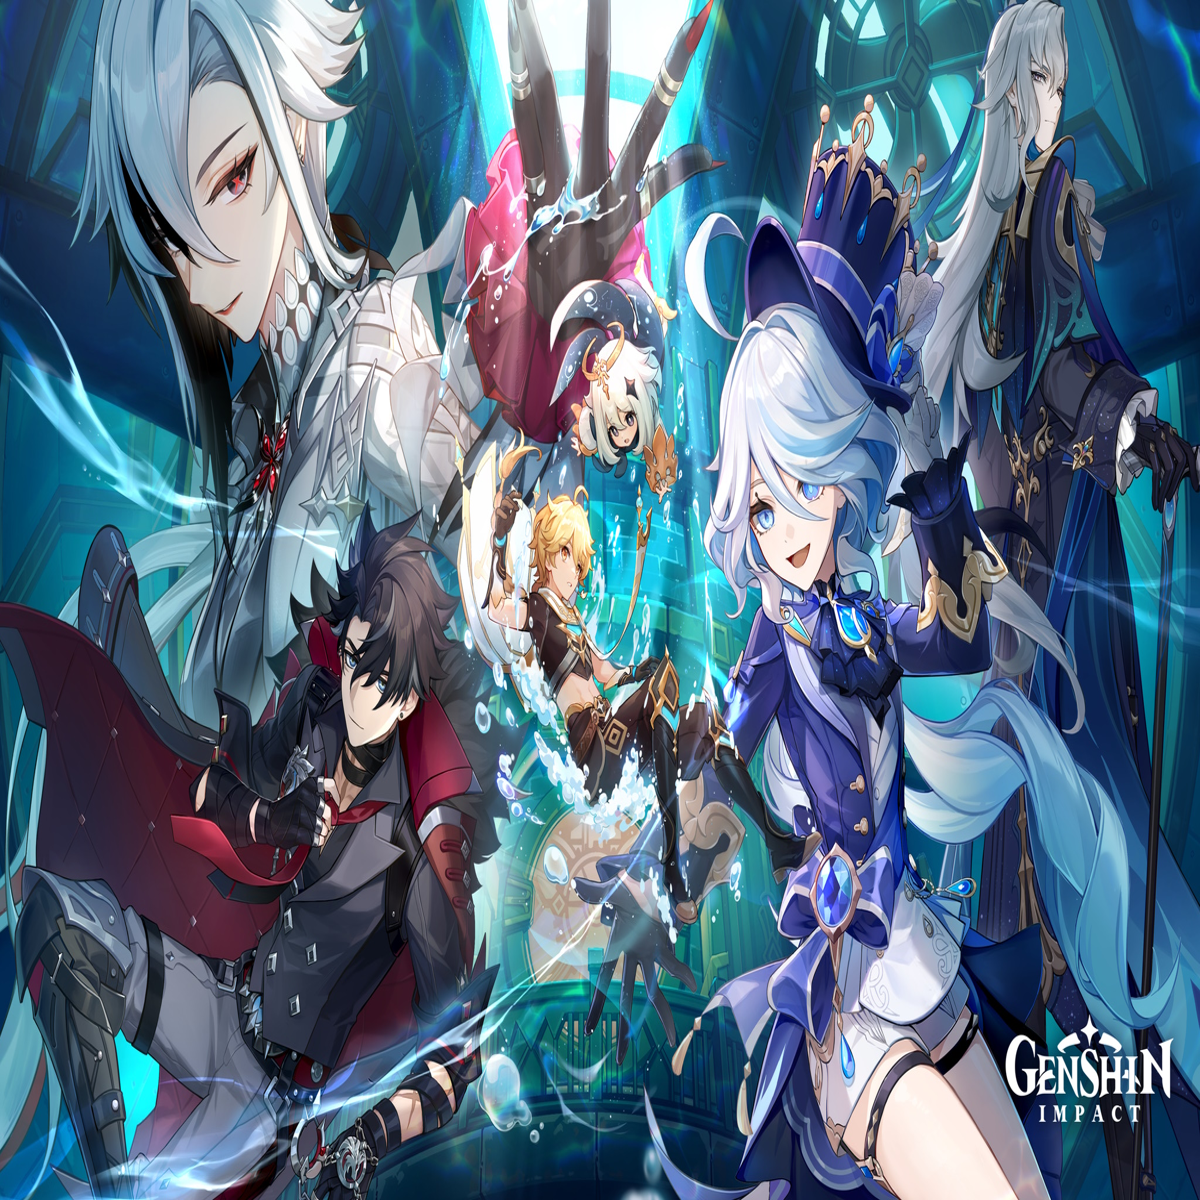 Genshin Impact 4.1 release time, new characters, banners, and events